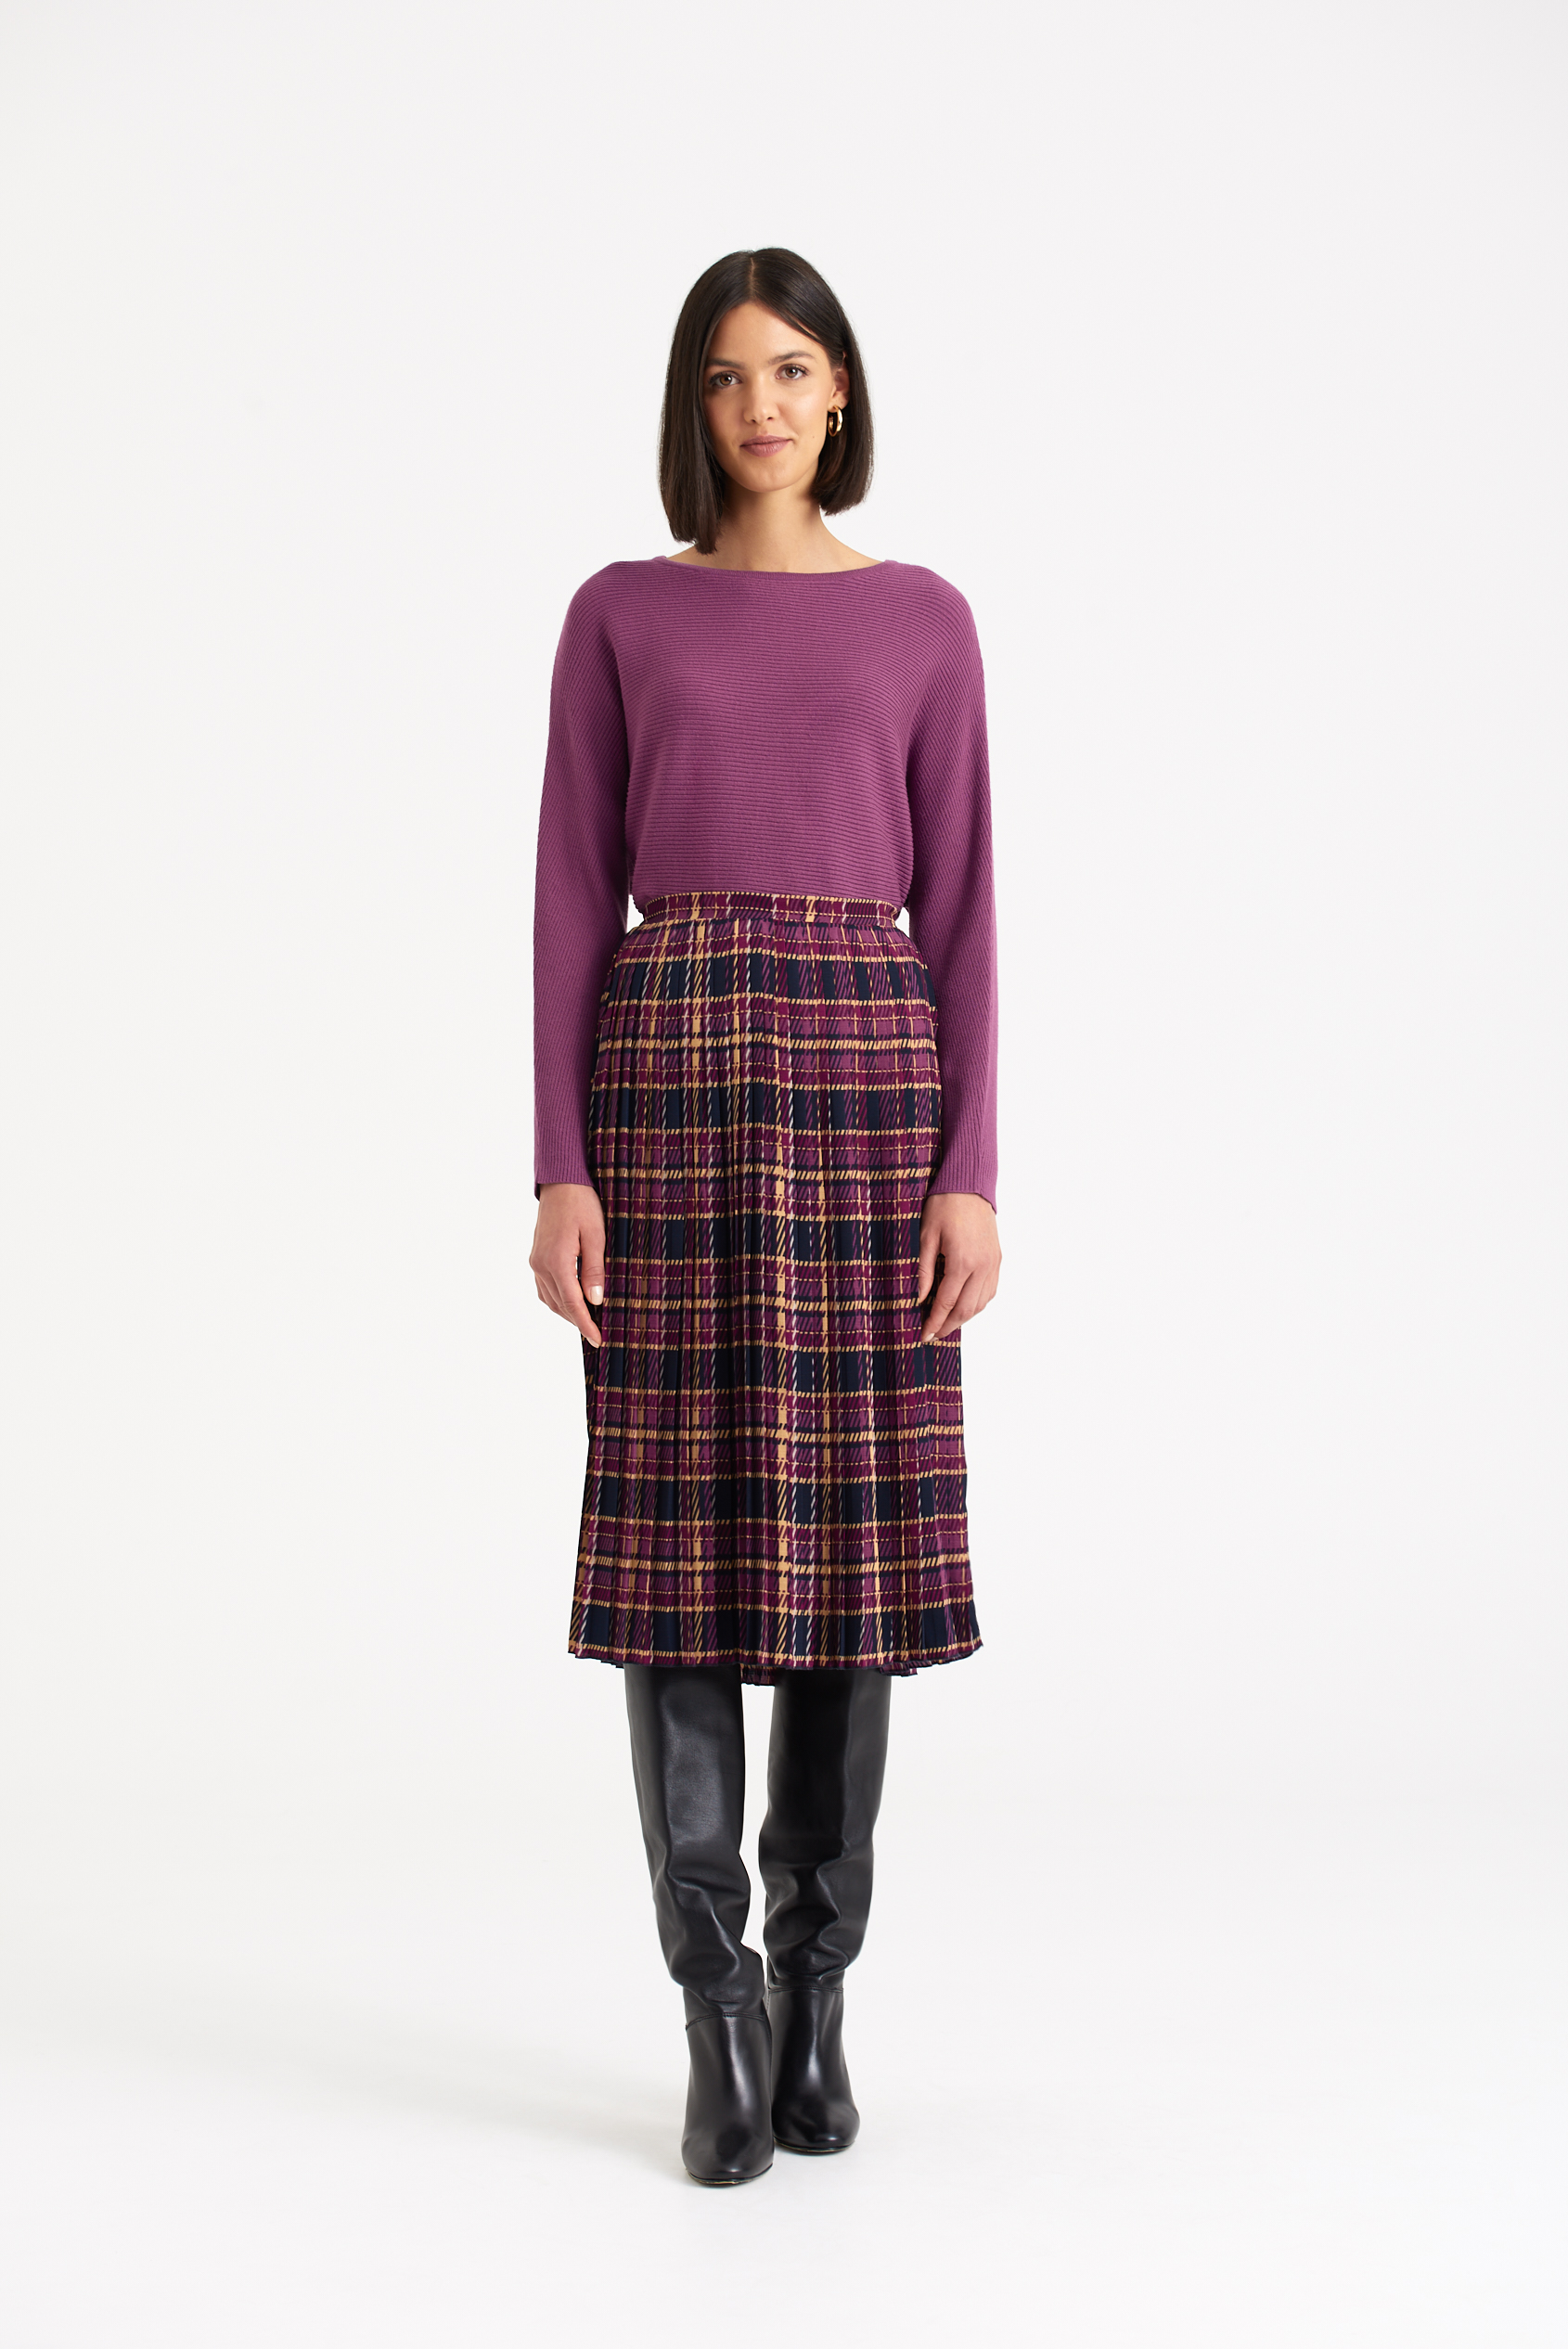 Greenpoint Woman's Skirt SPC320W22CHE06